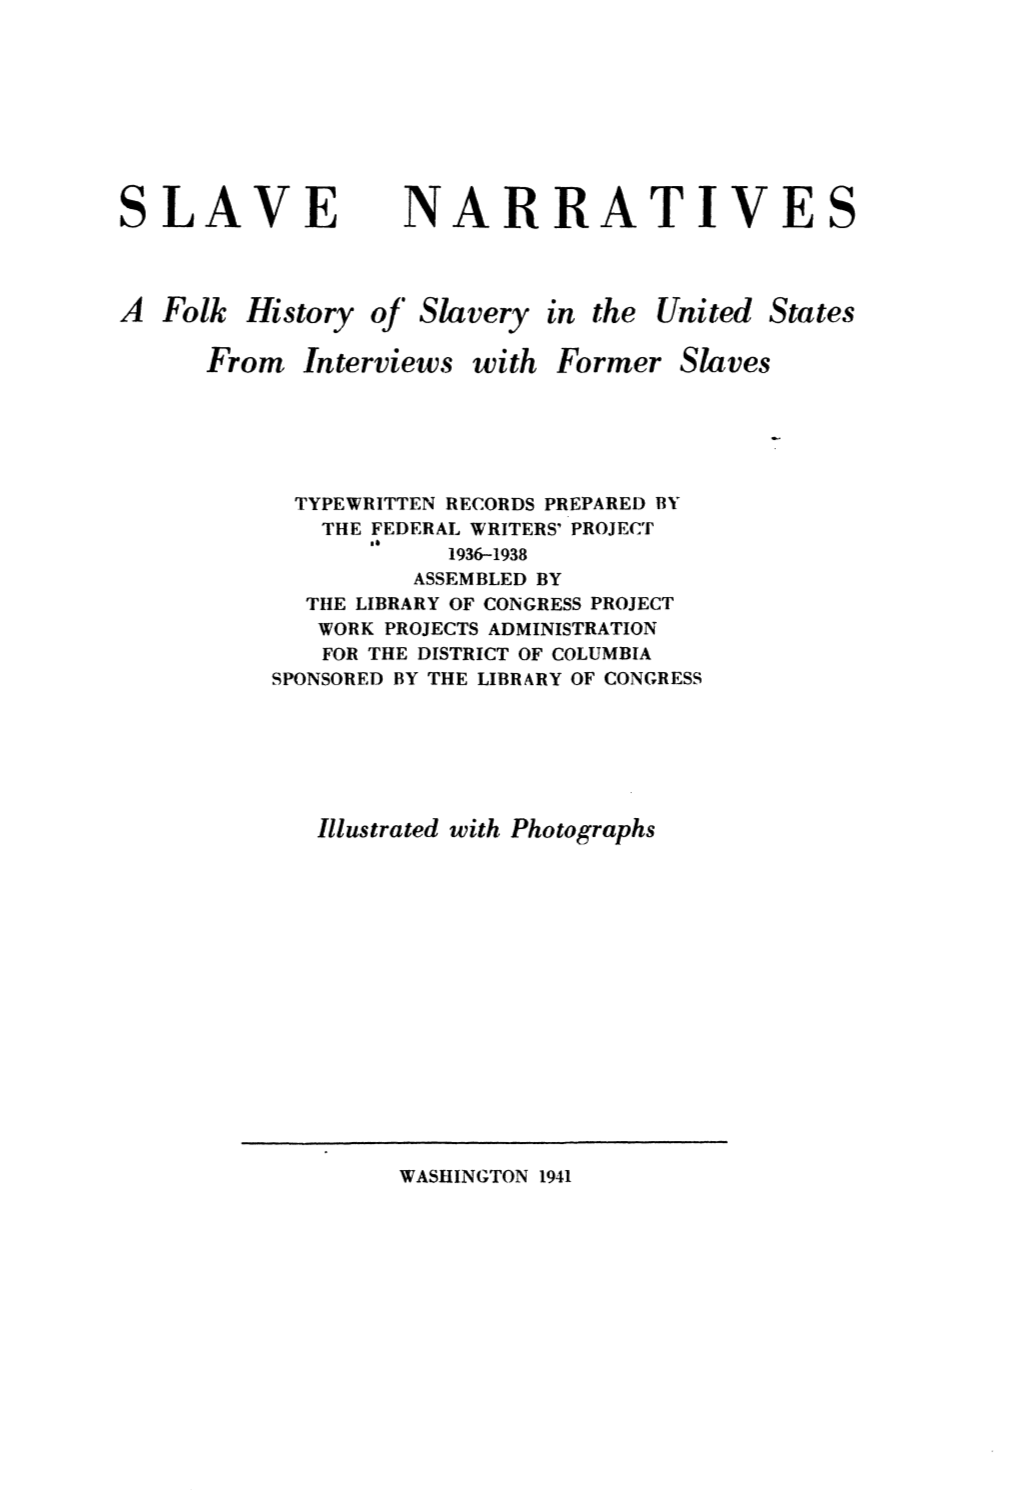 A Folk History Of' Slavery in the United States from Interviews with Former Slaves